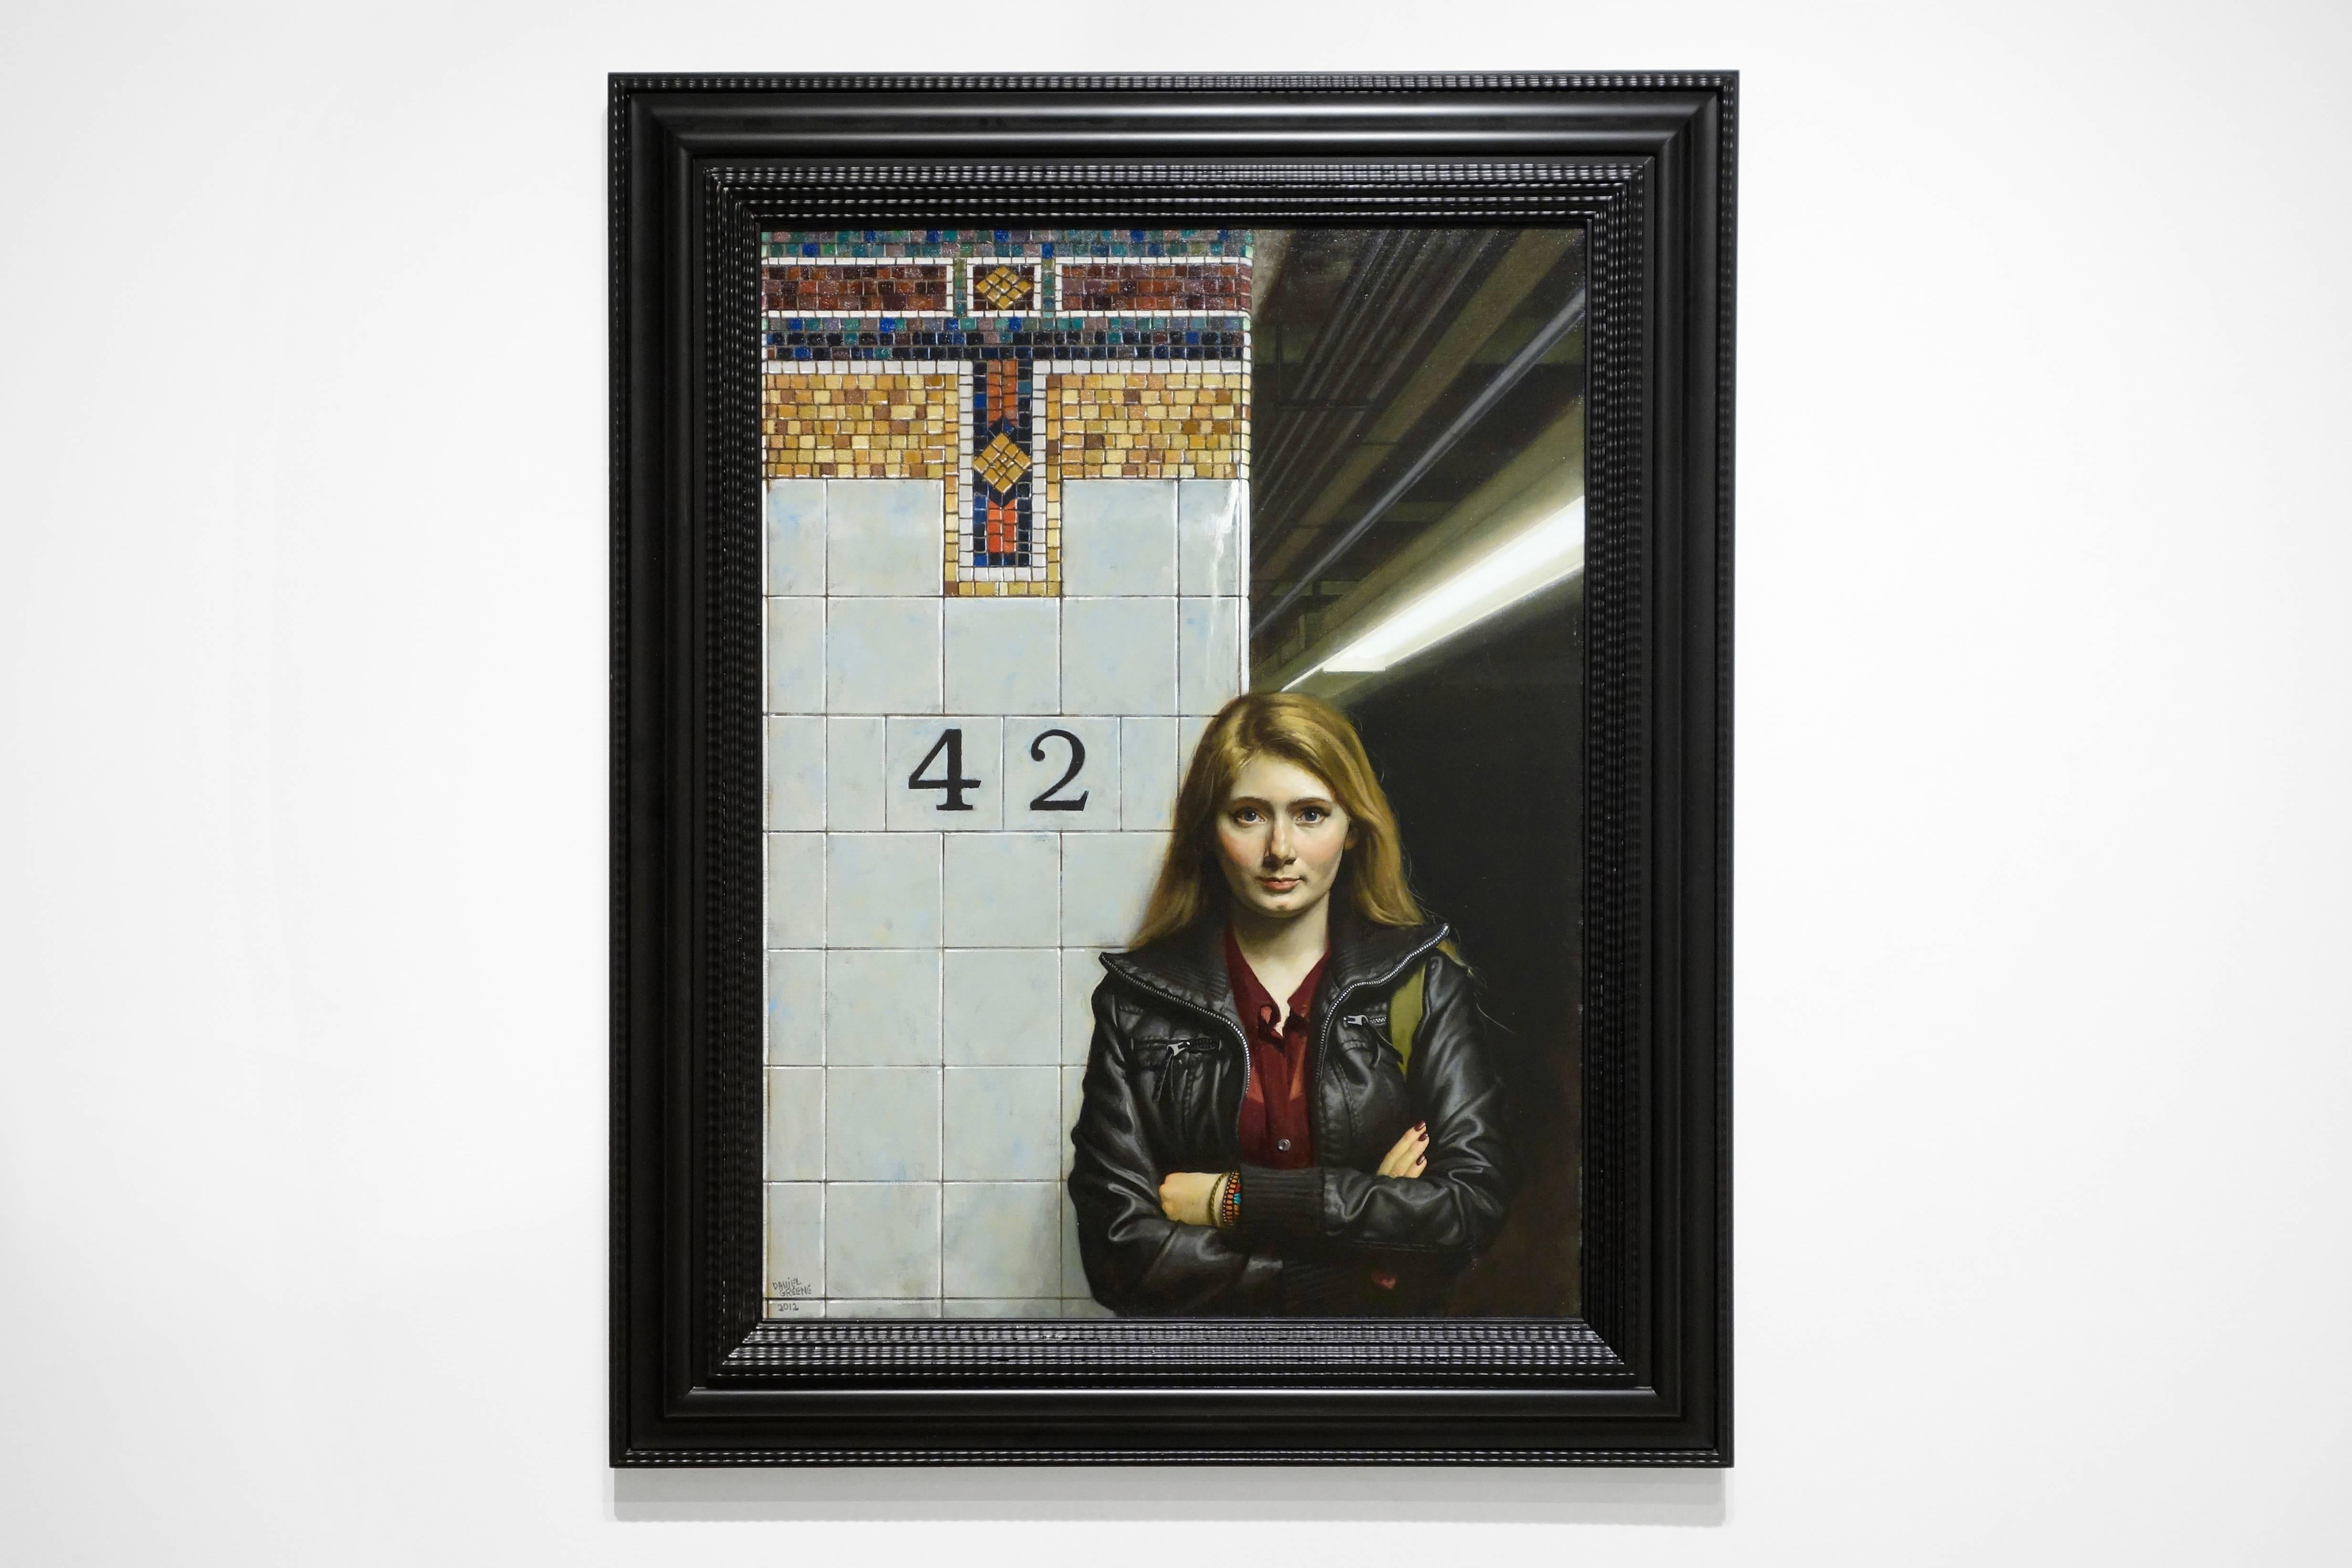 YOUNG GIRL - 42ND ST., hyper-realism, portrait of girl, blond hair, subway  - Painting by Daniel Greene